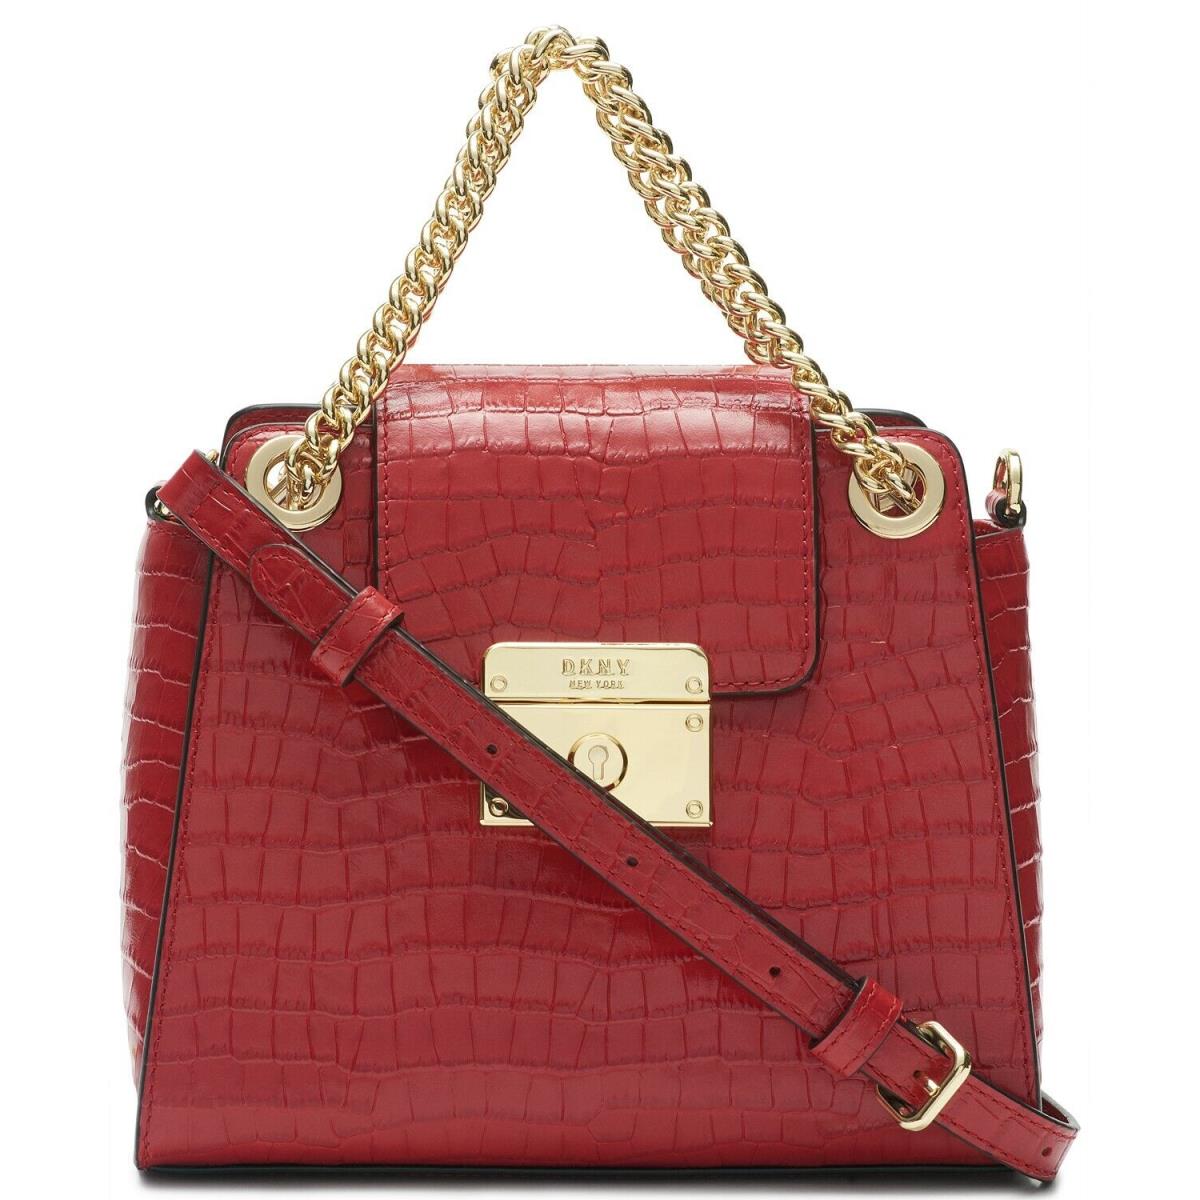 Dkny Lilian Chain Flap Red Crossbody Bag - Exterior: Red